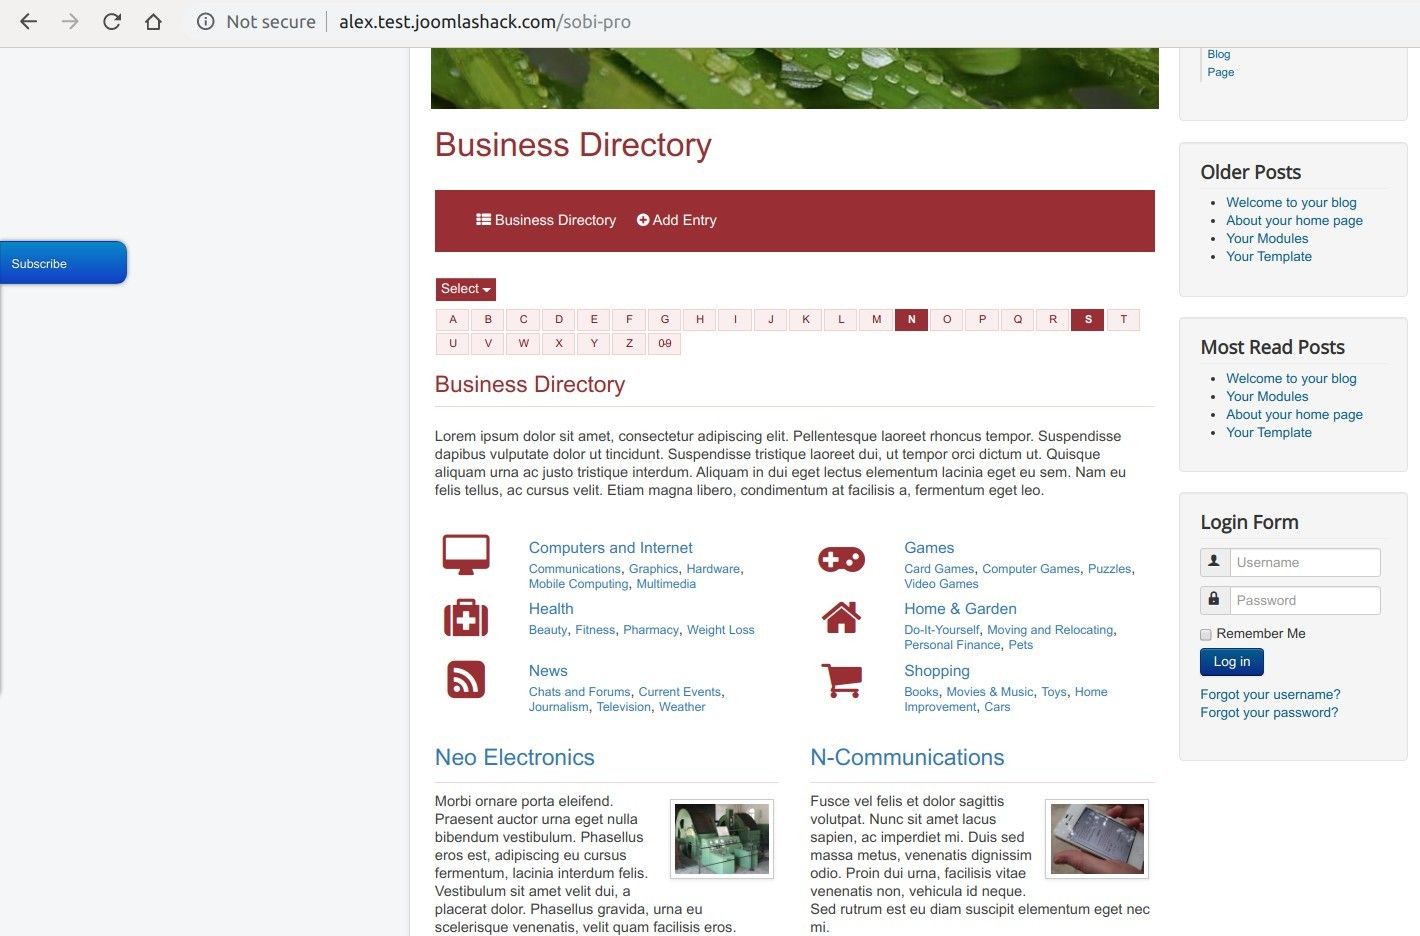 01 sobipro demo business directory frontend